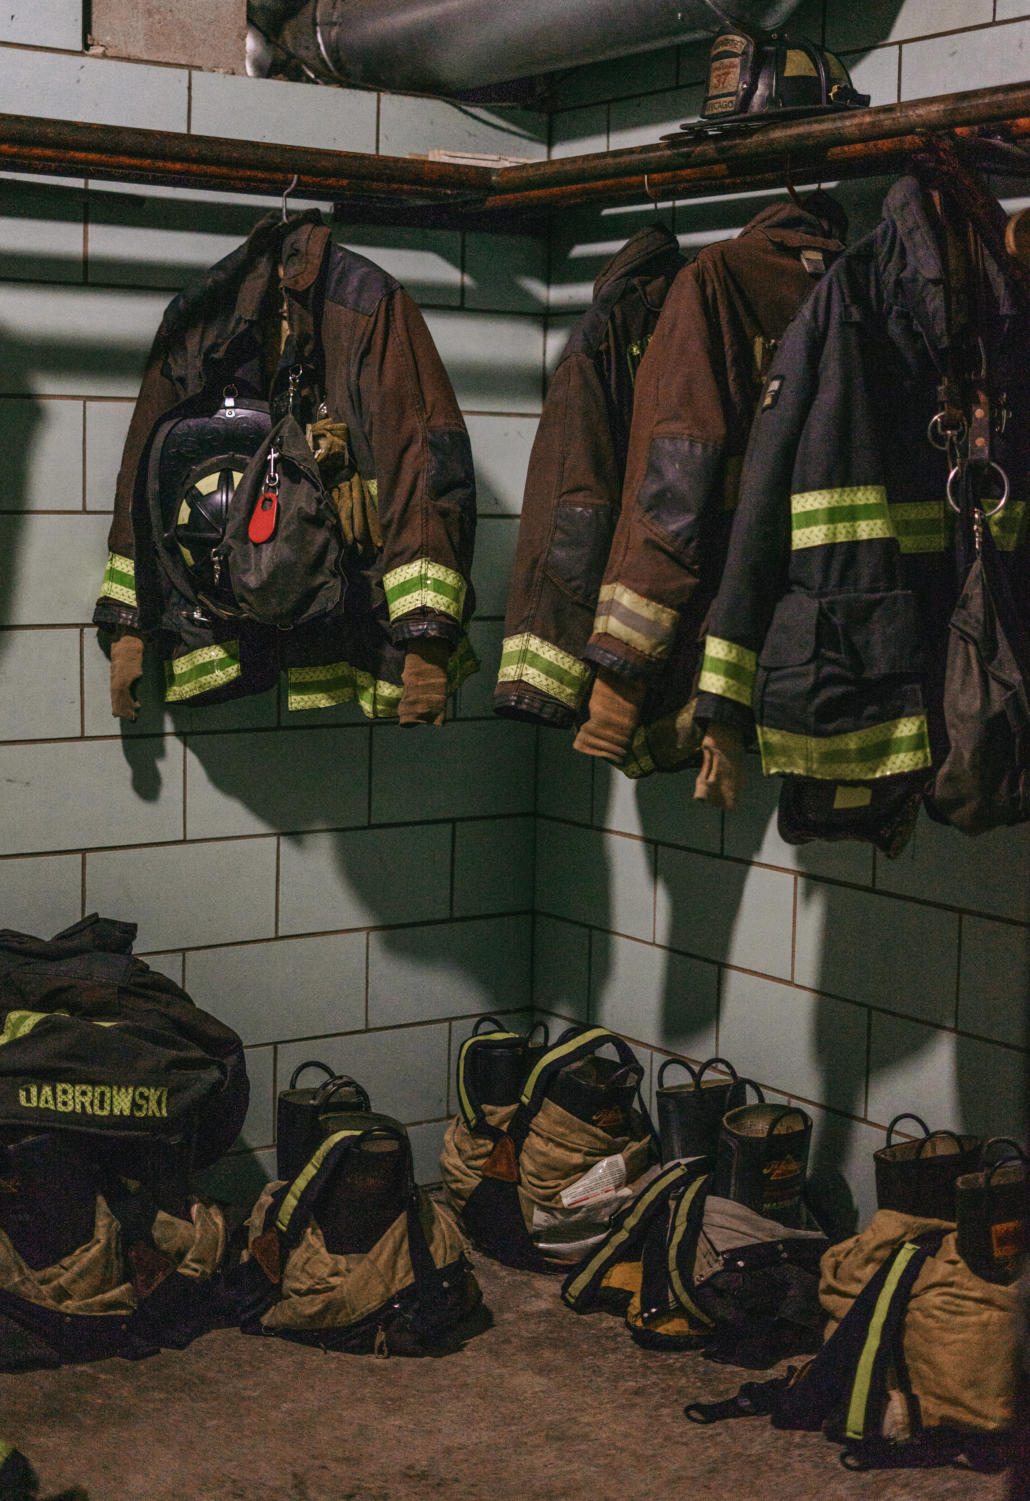 Firefighting apparel stored in one of the communal closet spaces